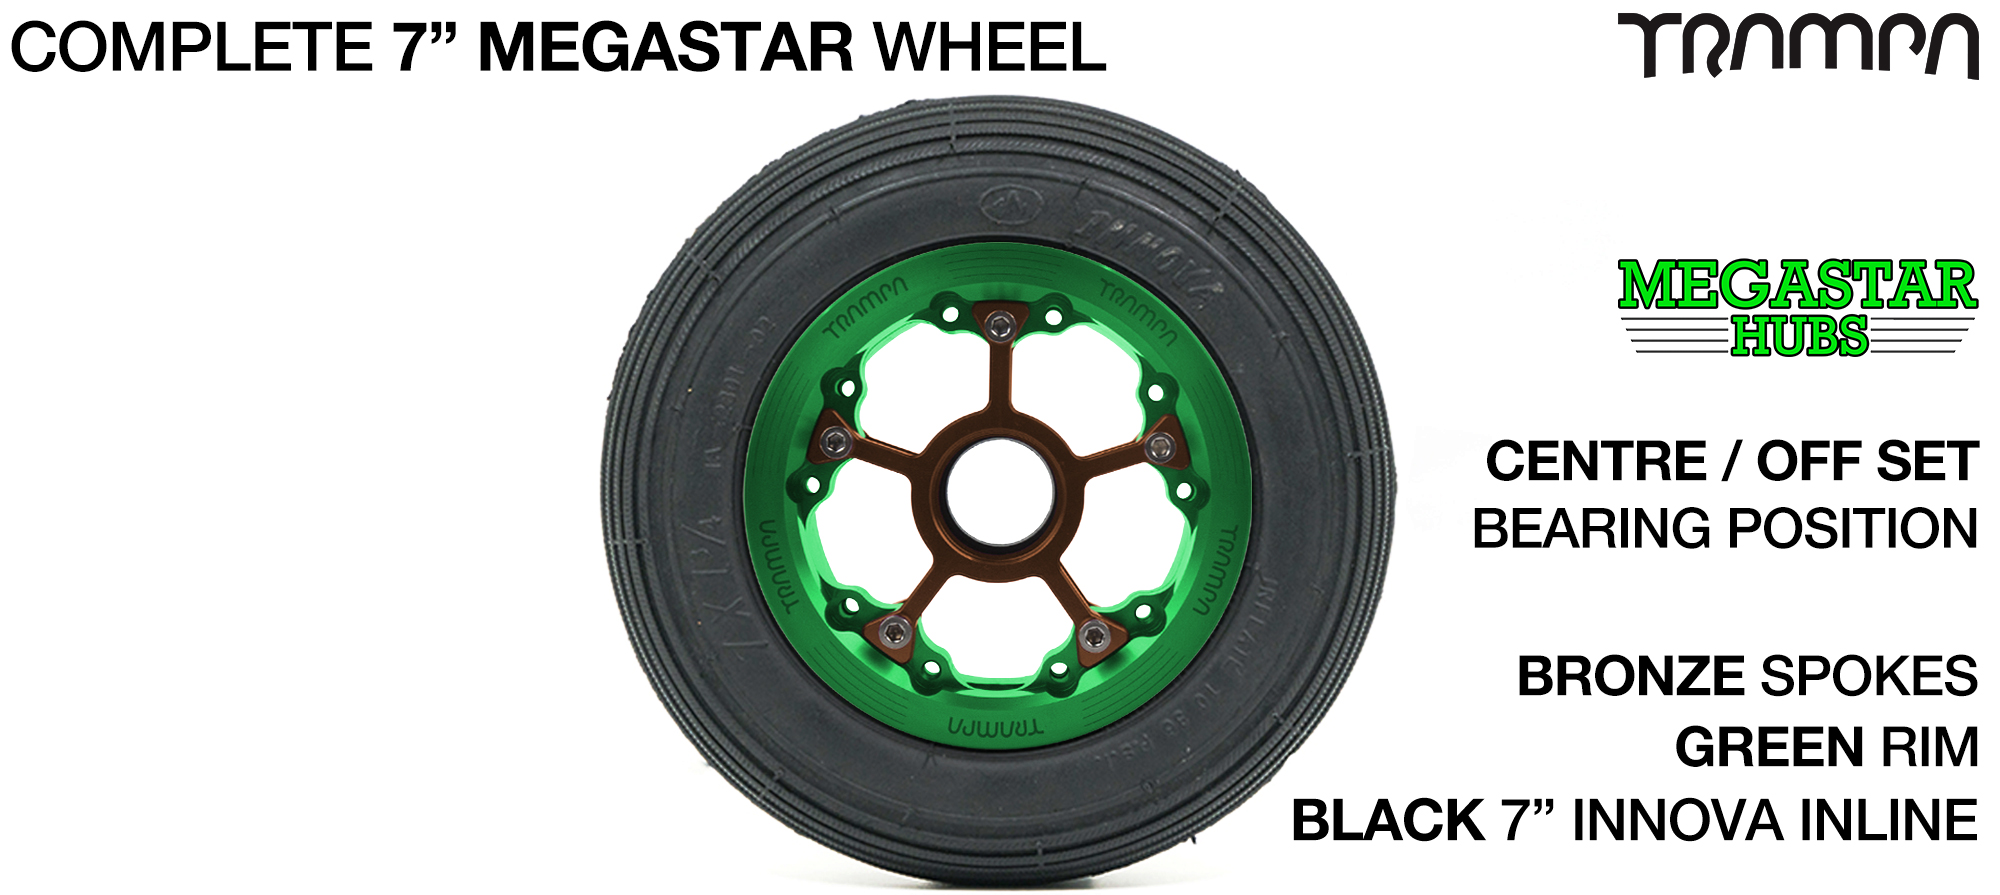 GREEN MEGASTAR Rims with BRONZE Spokes & 7 Inch Tyres